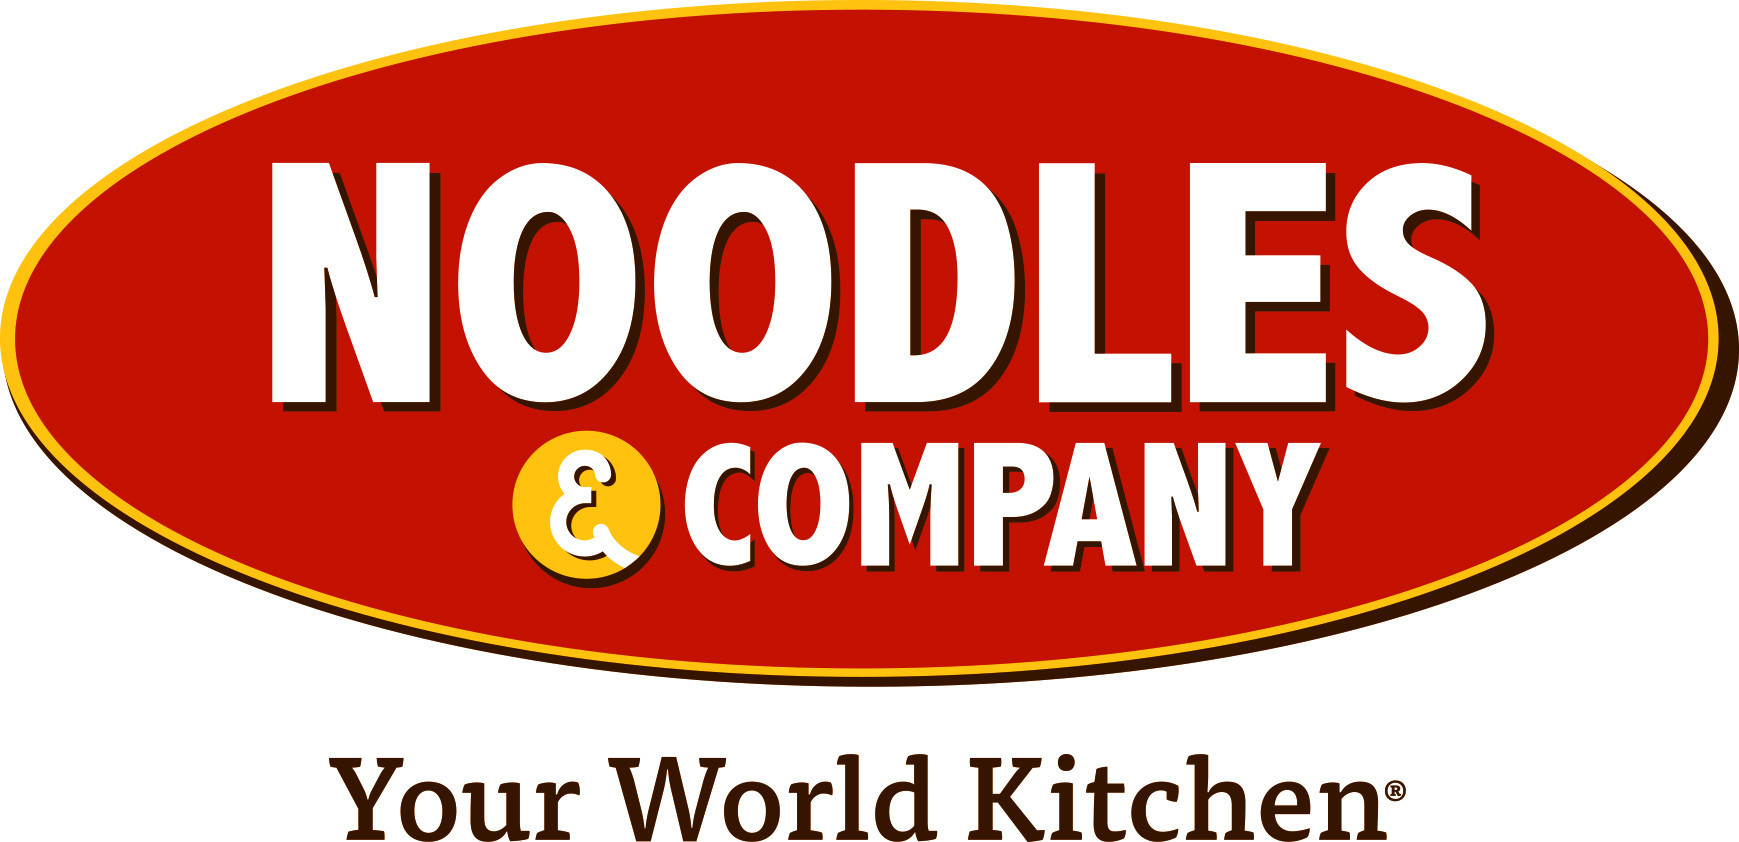 Closest Noodles &amp; Company
 20 Best the Noodles pany Best Round Up Recipe Collections